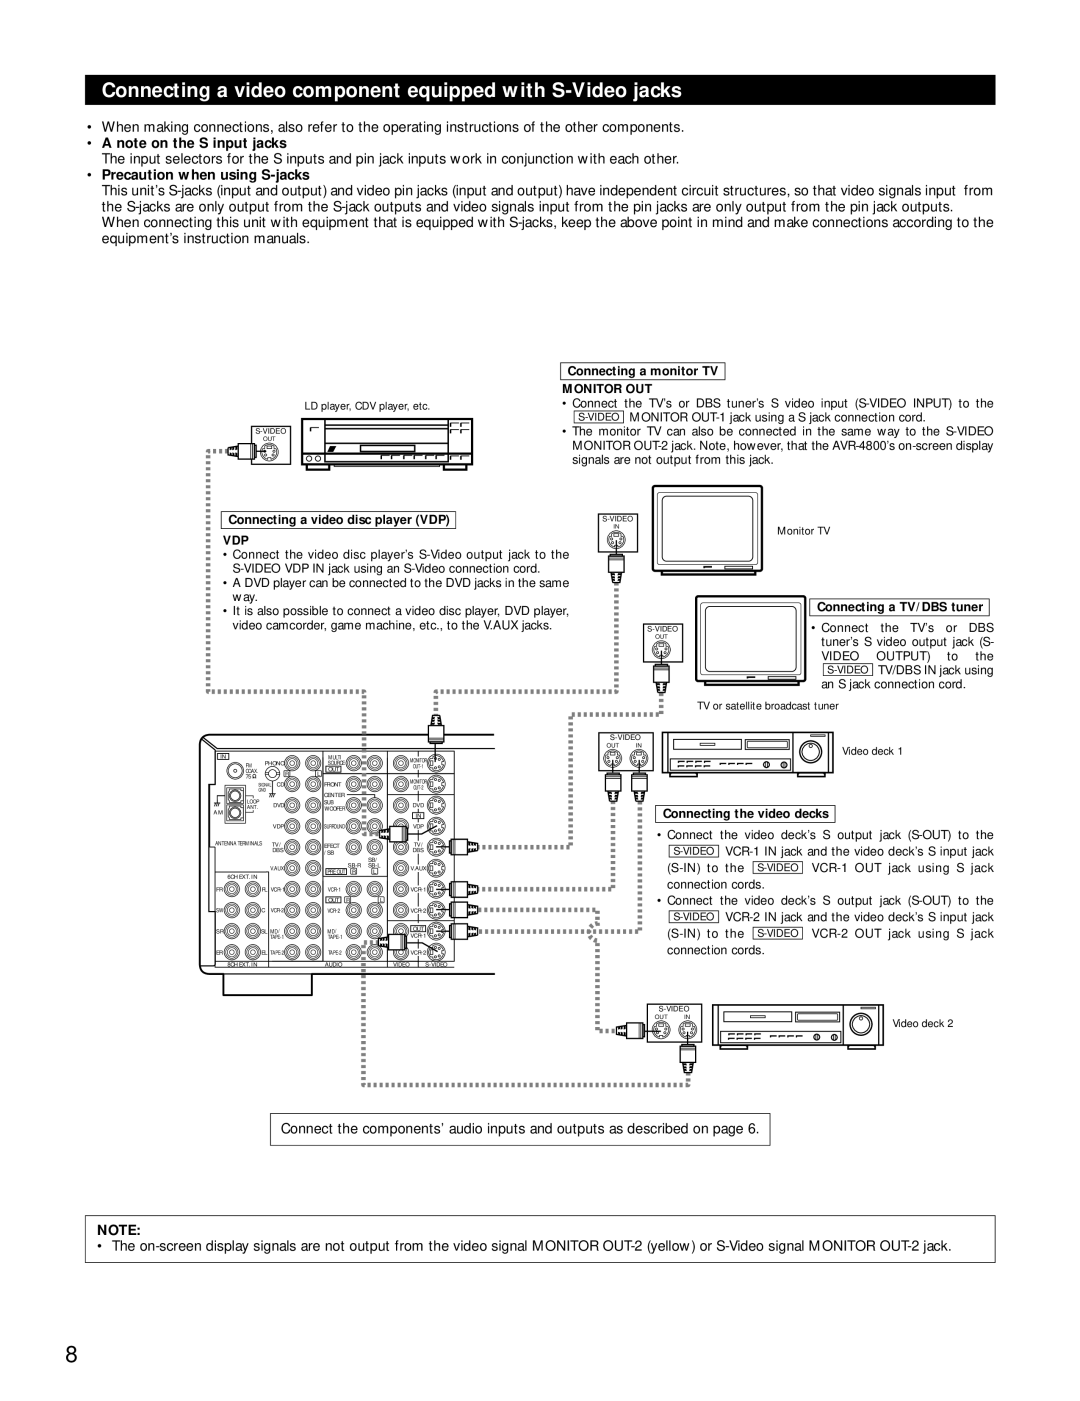 Denon AVR-4800 manual •A note on the S input jacks, •Precaution when using S-jacks, Connecting a monitor TV MONITOR OUT 